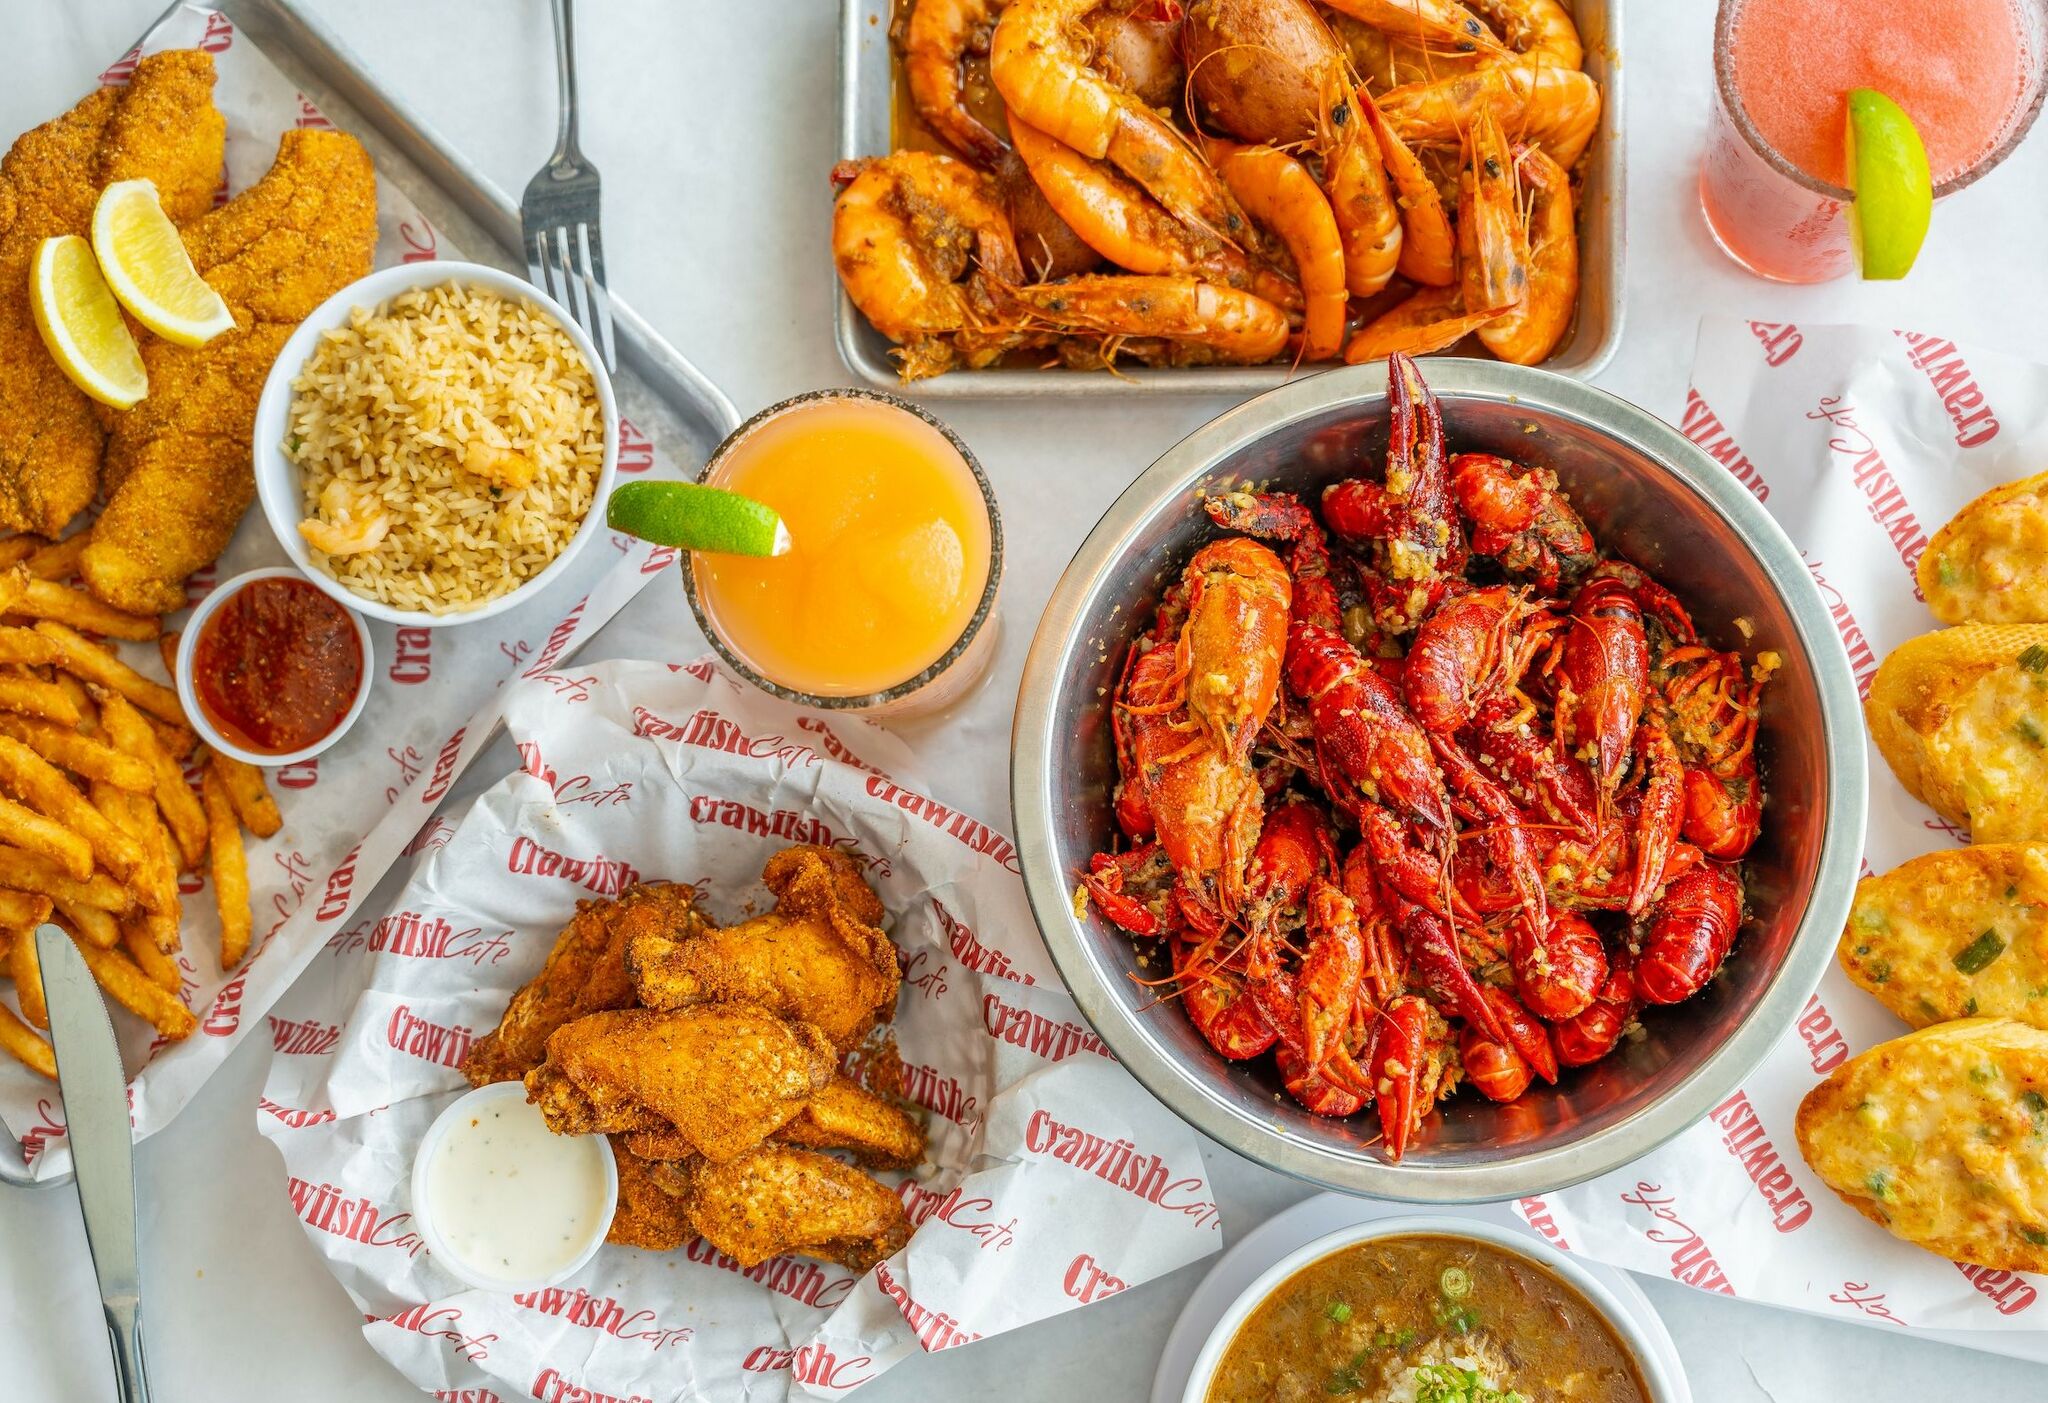 Grand Seafood Plateau – Texas Monthly